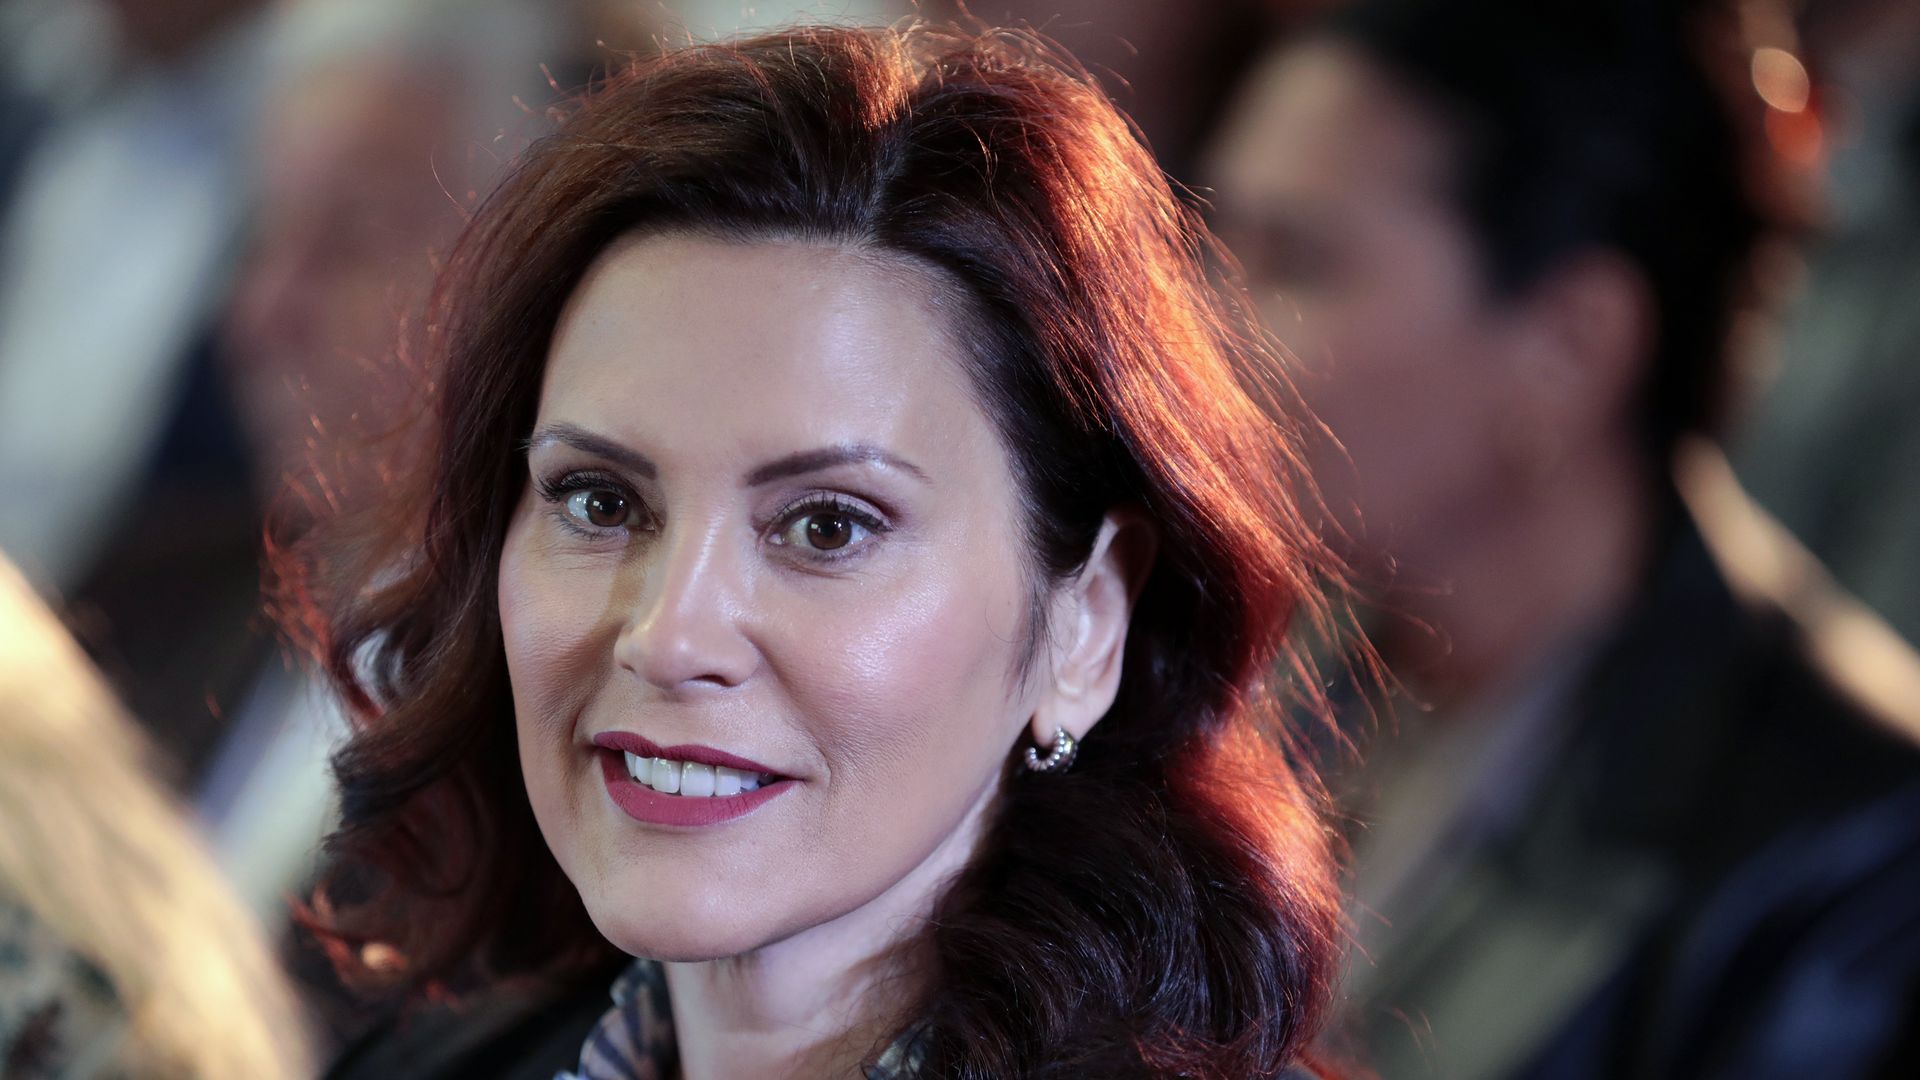 Gretchen Whitmer, governor of Michigan, during an opening event.